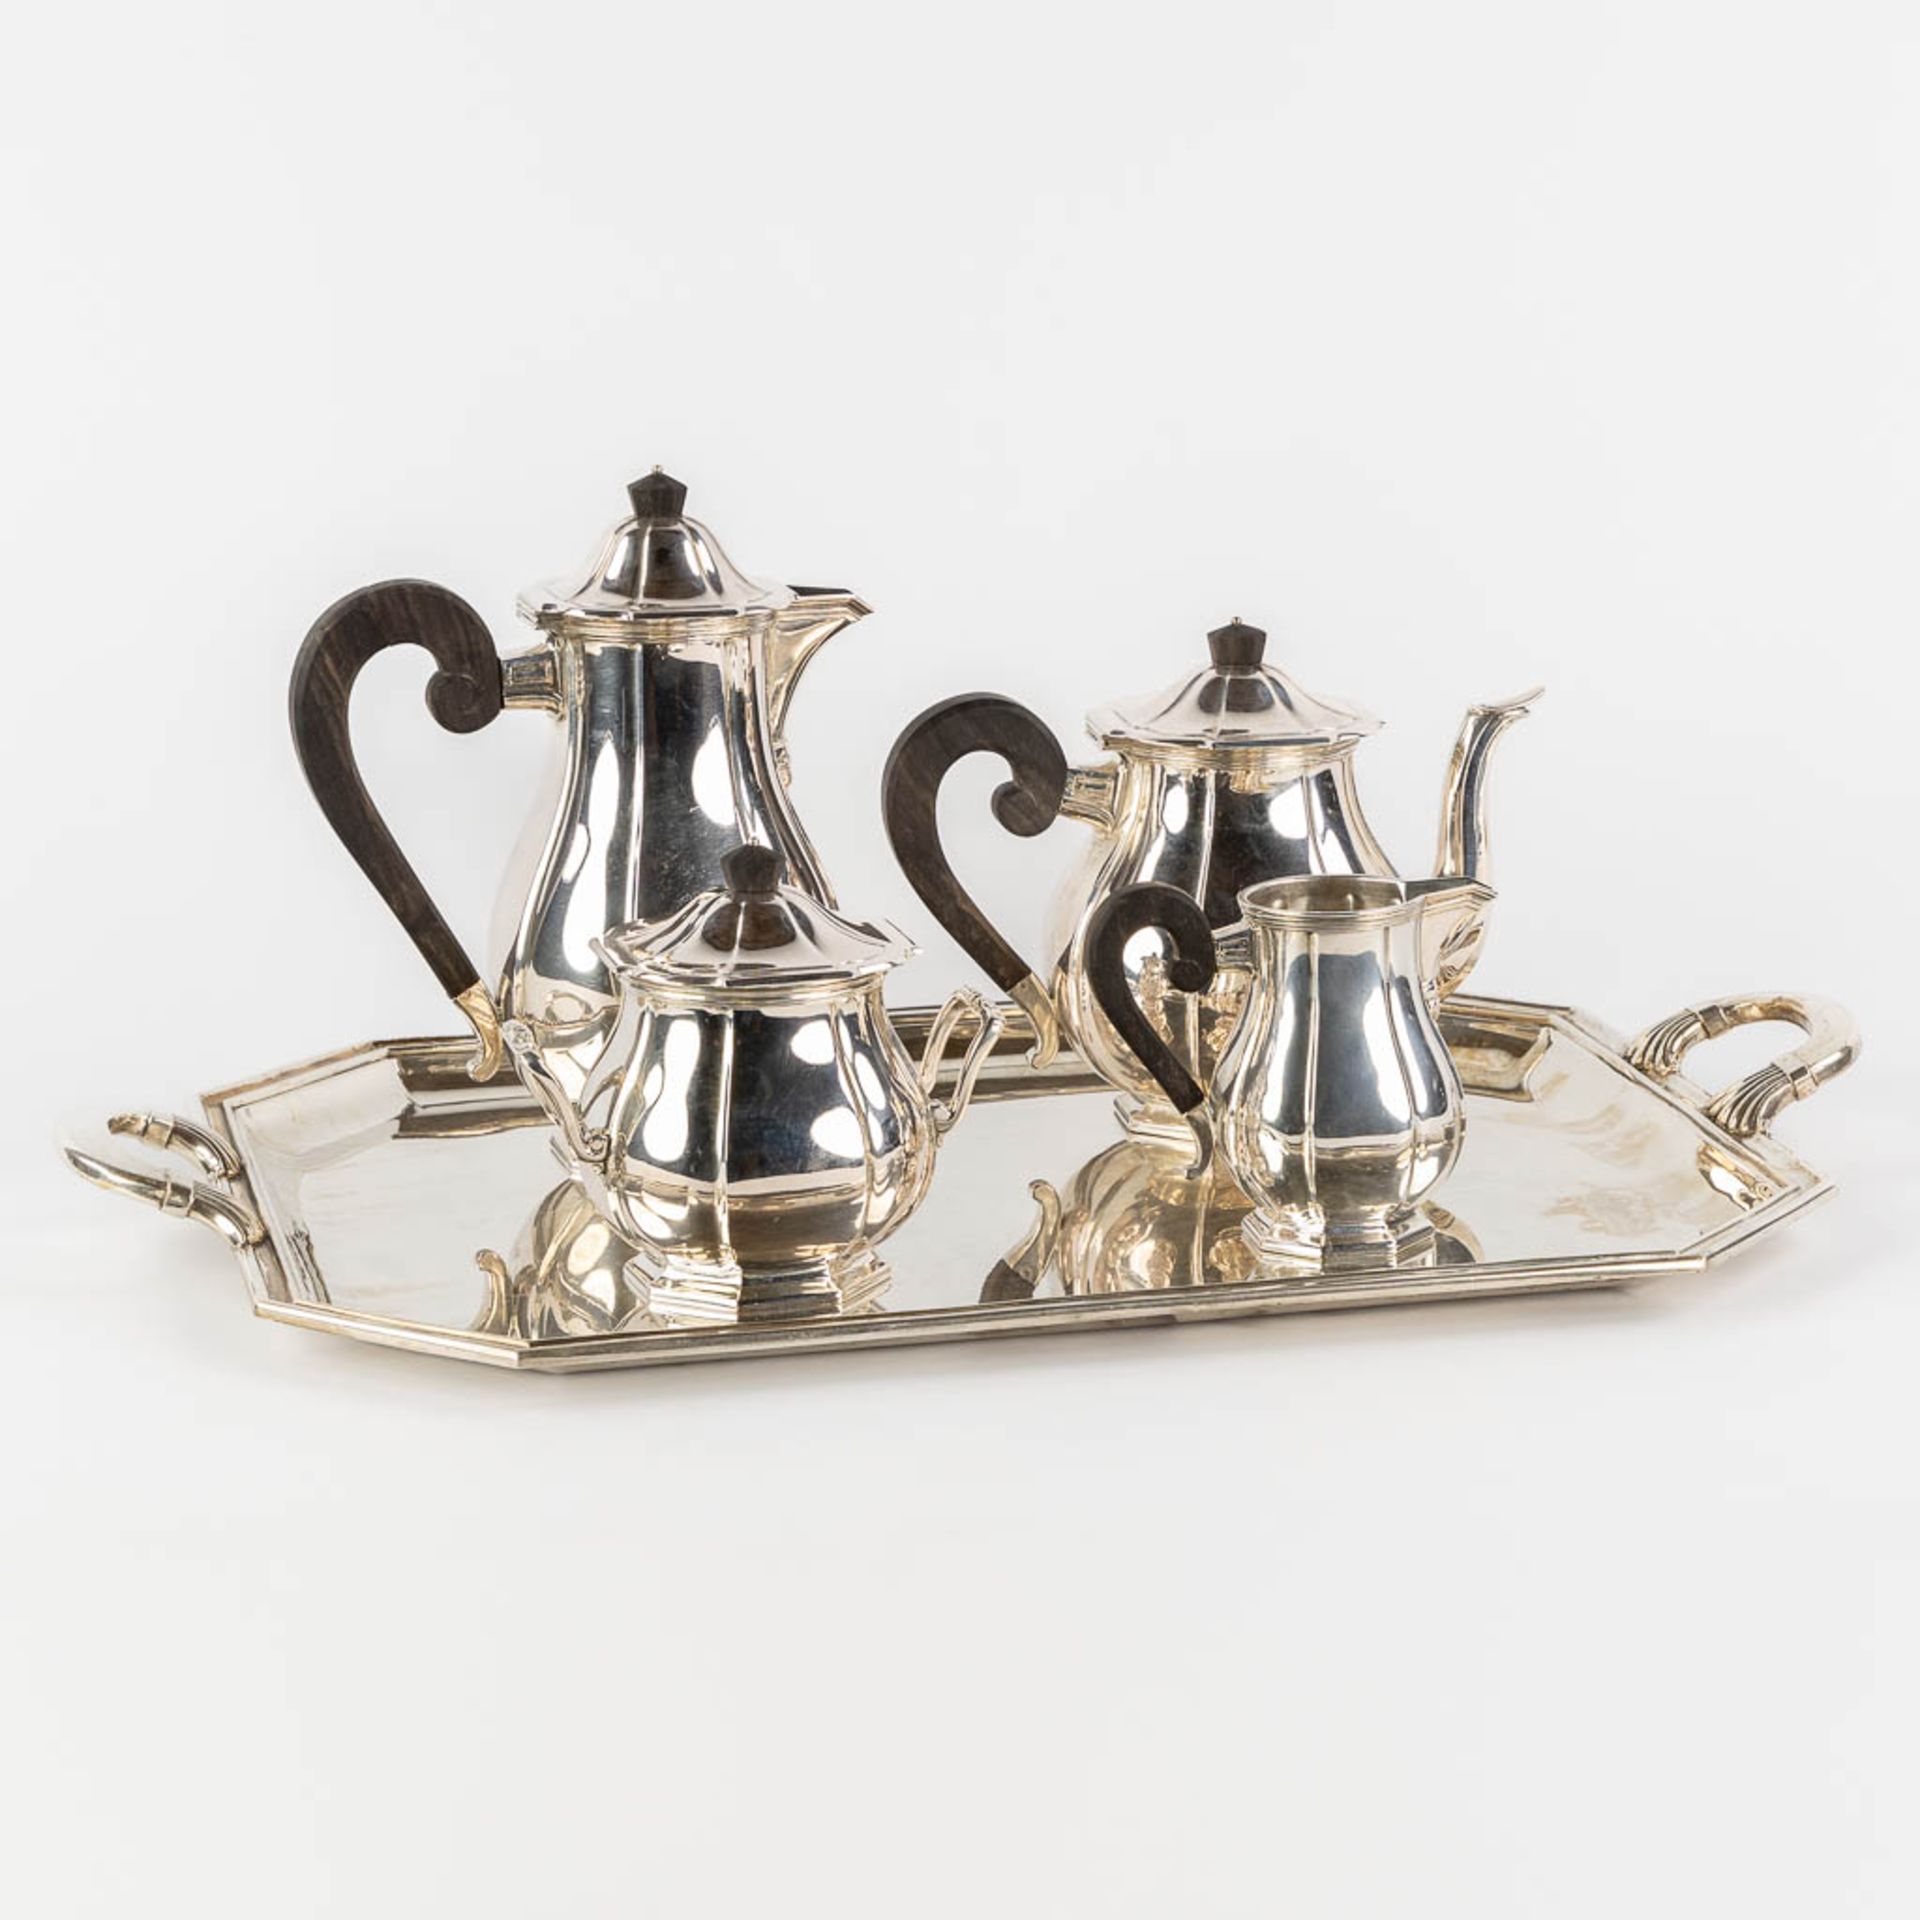 Decoster Bruxelles, a silver coffee and tea service standing on a platter. 6,247kg, M900 & M800.